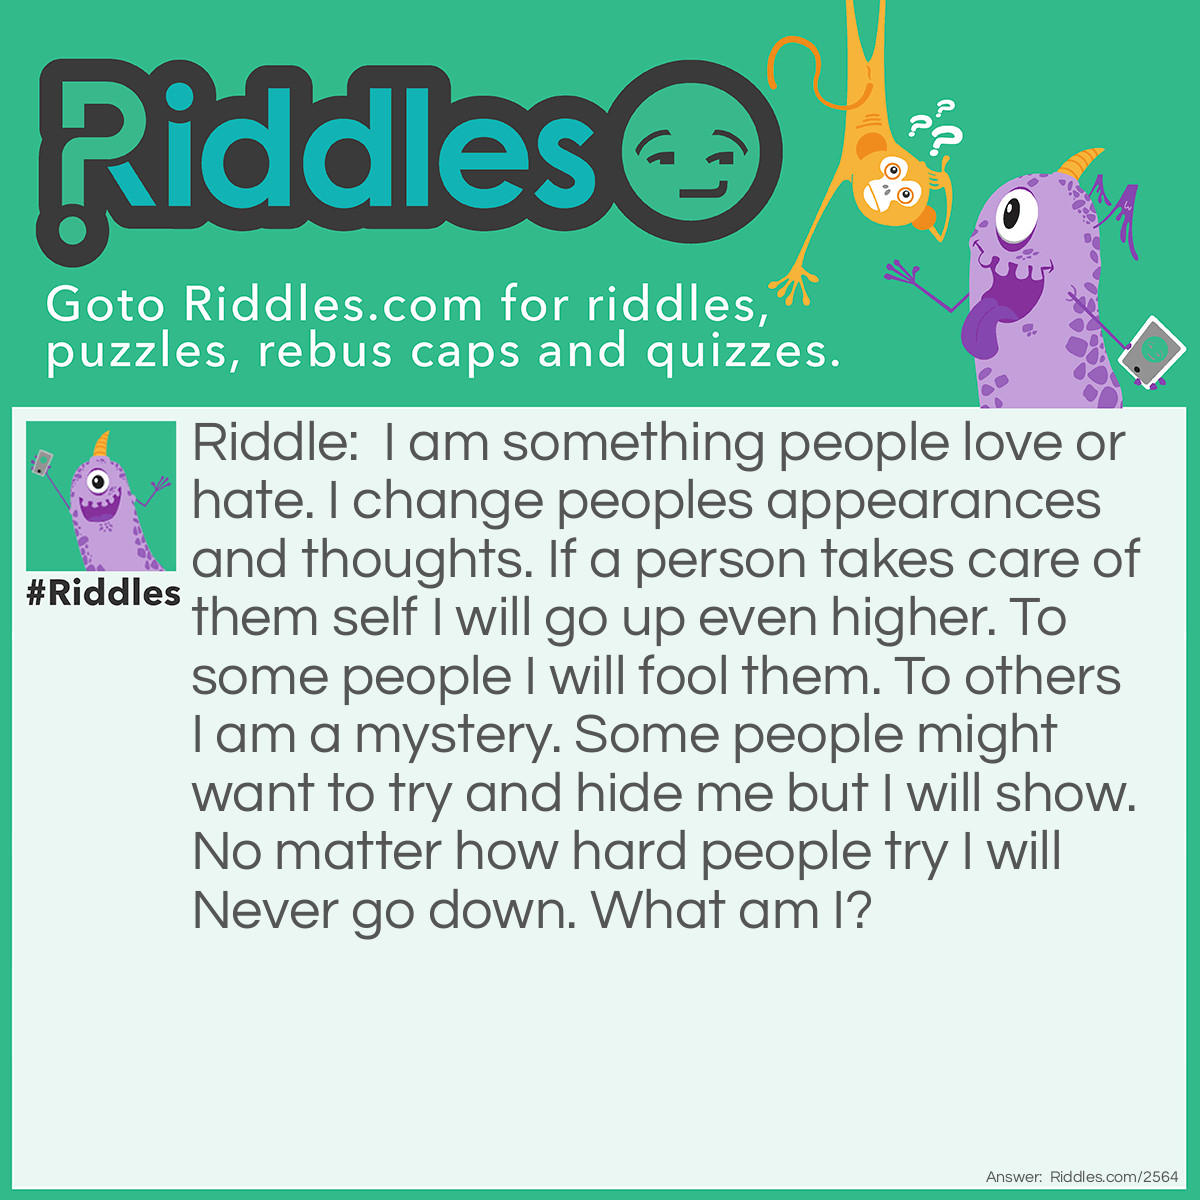 Riddle: I am something people love or hate. I change peoples appearances and thoughts. If a person takes care of them self I will go up even higher. To some people I will fool them. To others I am a mystery. Some people might want to try and hide me but I will show. No matter how hard people try I will Never go down. What am I? Answer: Age.